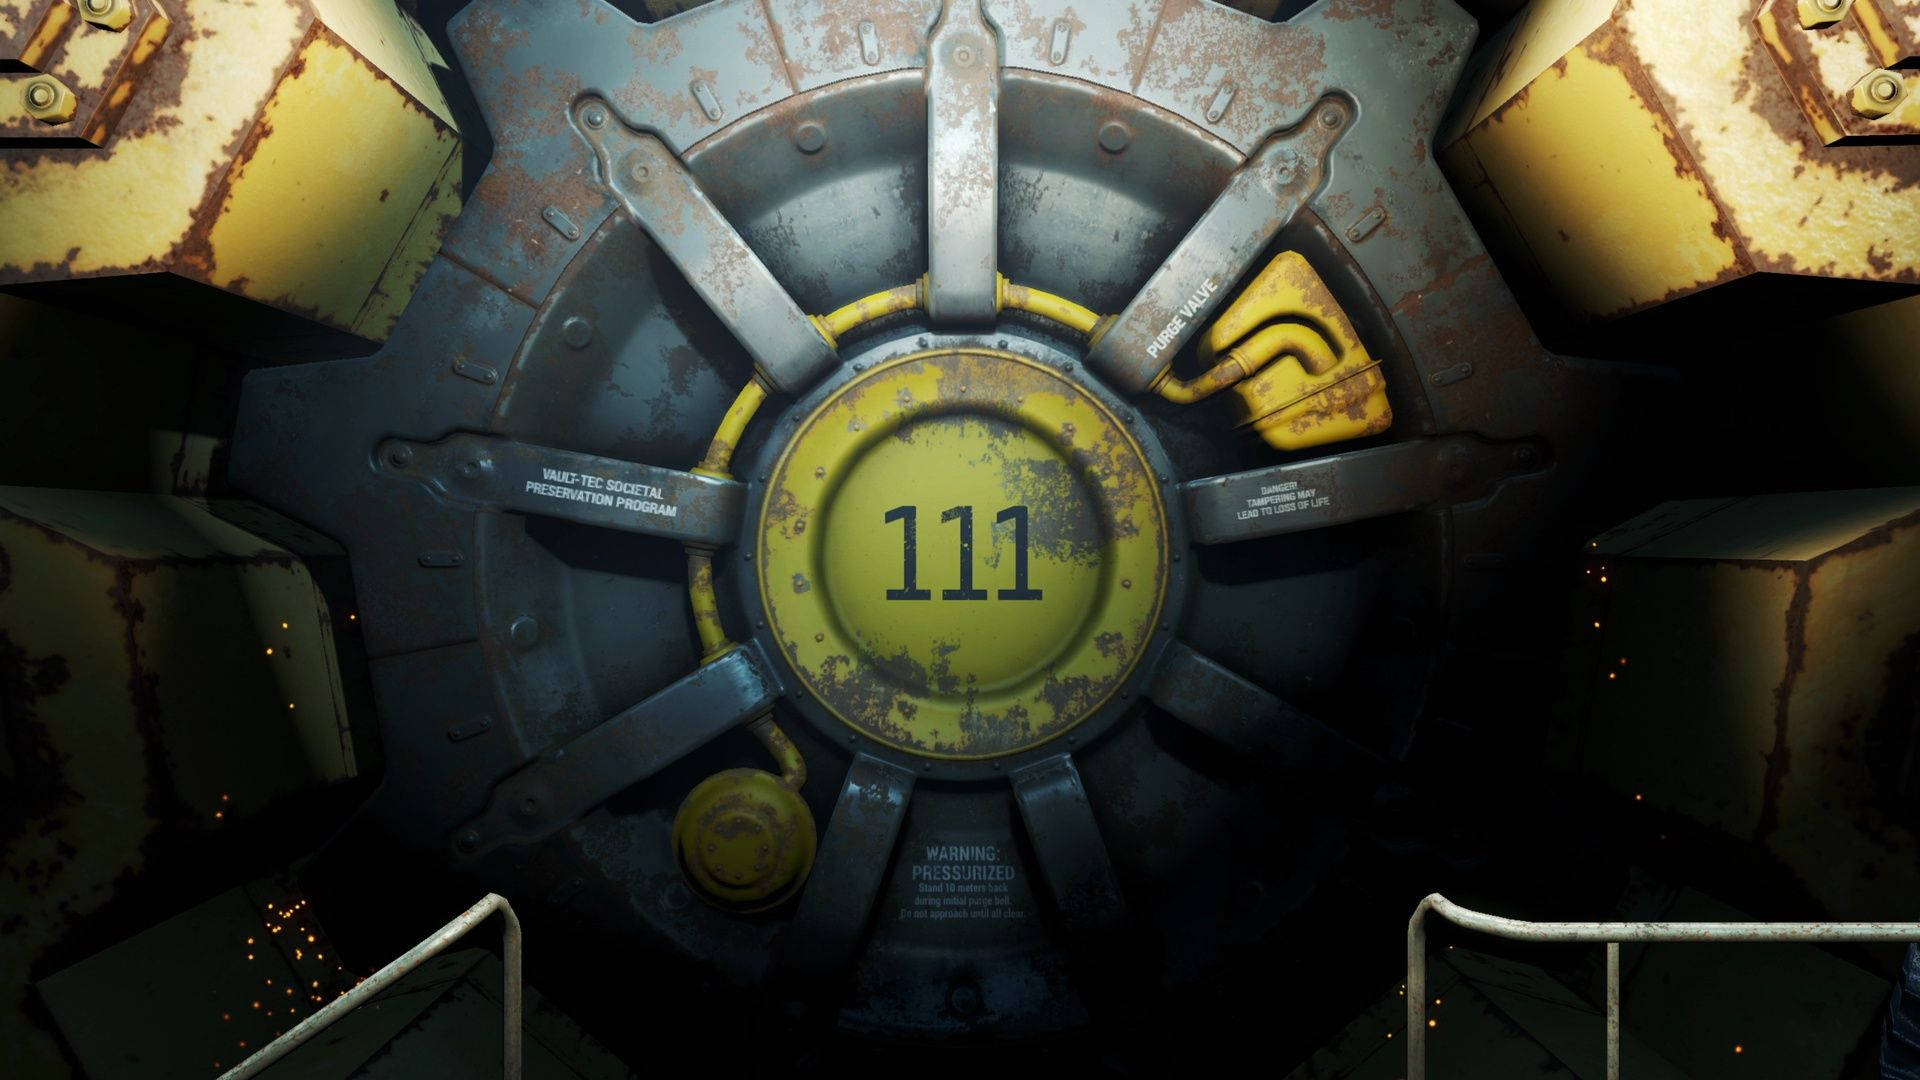 Vault 111 Door - the entrance to a Vault in Fallout 4 Wallpaper